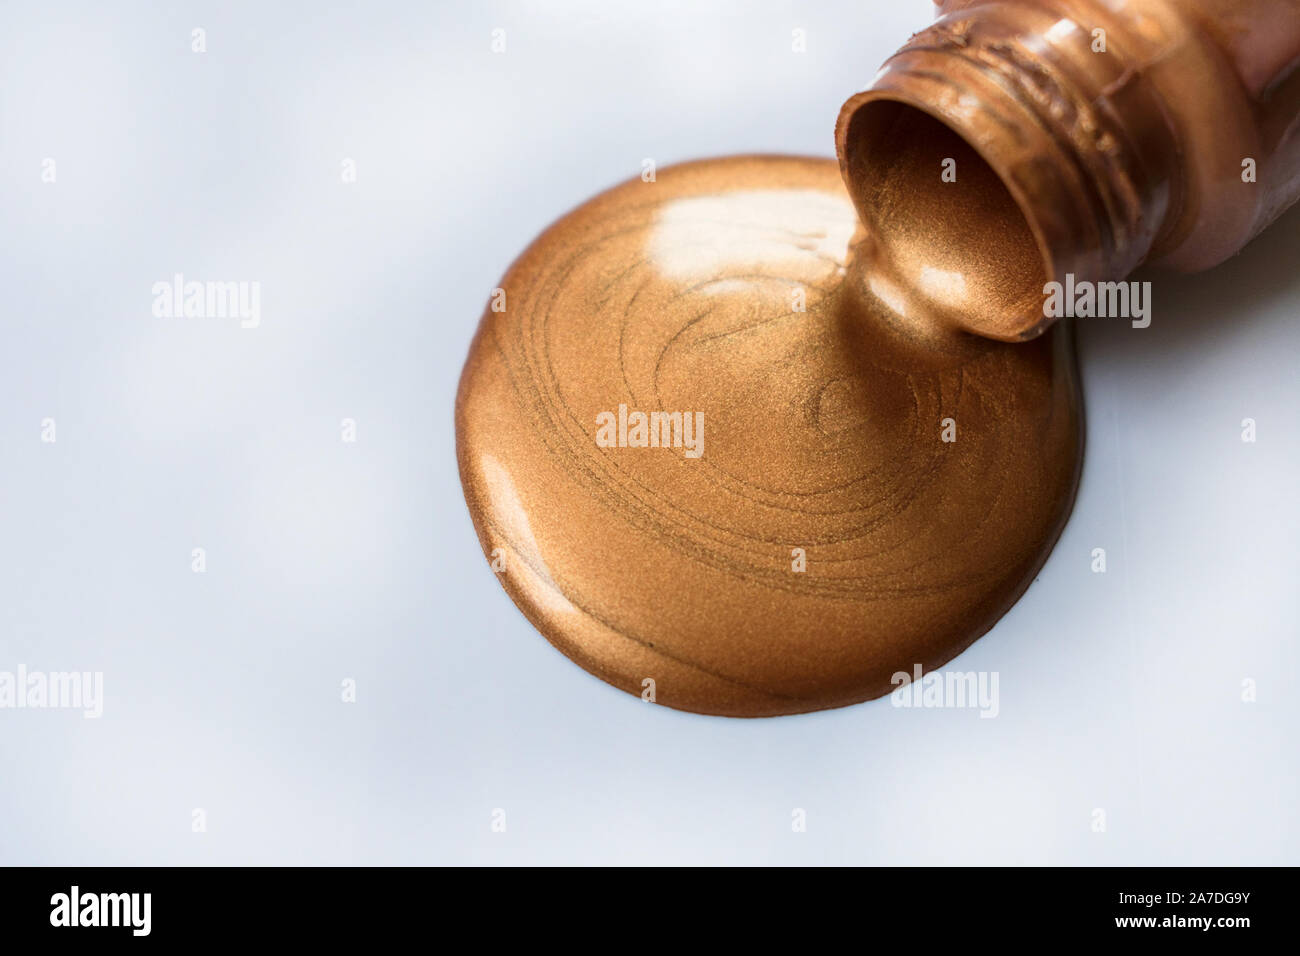 Copper-colored paint pouring from a bottle on a white background. Copy space. Stock Photo